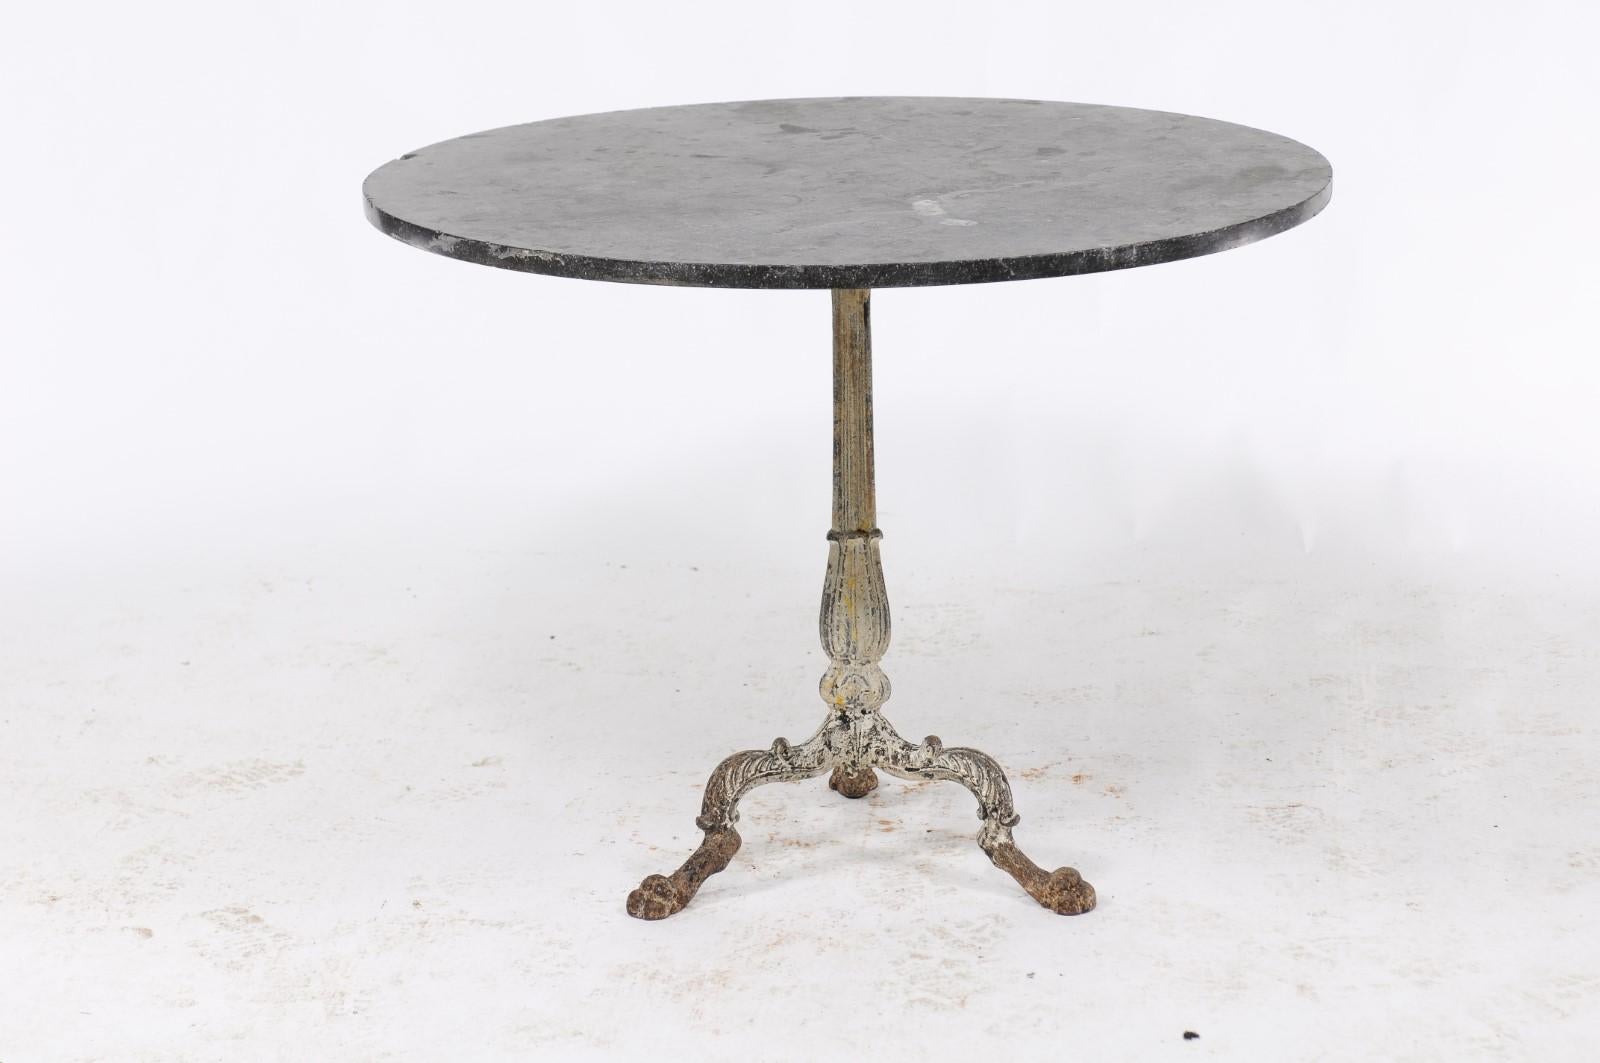 A French iron table from the early 19th century with round slate top and tripod base. From Northern France, this is an elegant round table with an intricately detailed iron base that features three legs. Topped by a beautiful grey top, this French